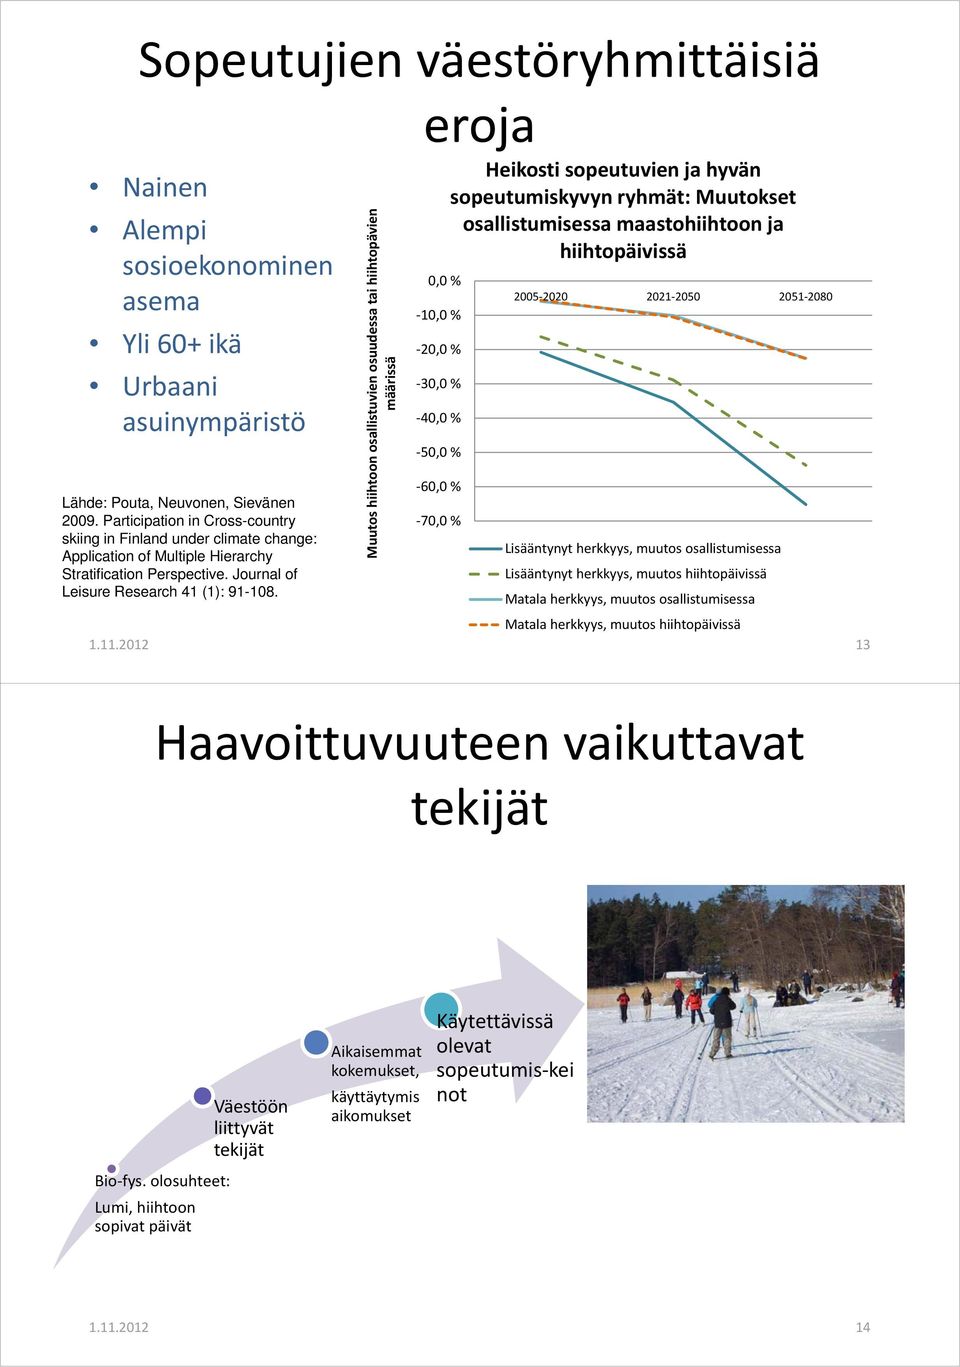 Participation in Cross-country 70,0, % skiing in Finland under climate change: Application of Multiple Hierarchy Stratification Perspective. Journal of Leisure Research 41 (1): 91-108.